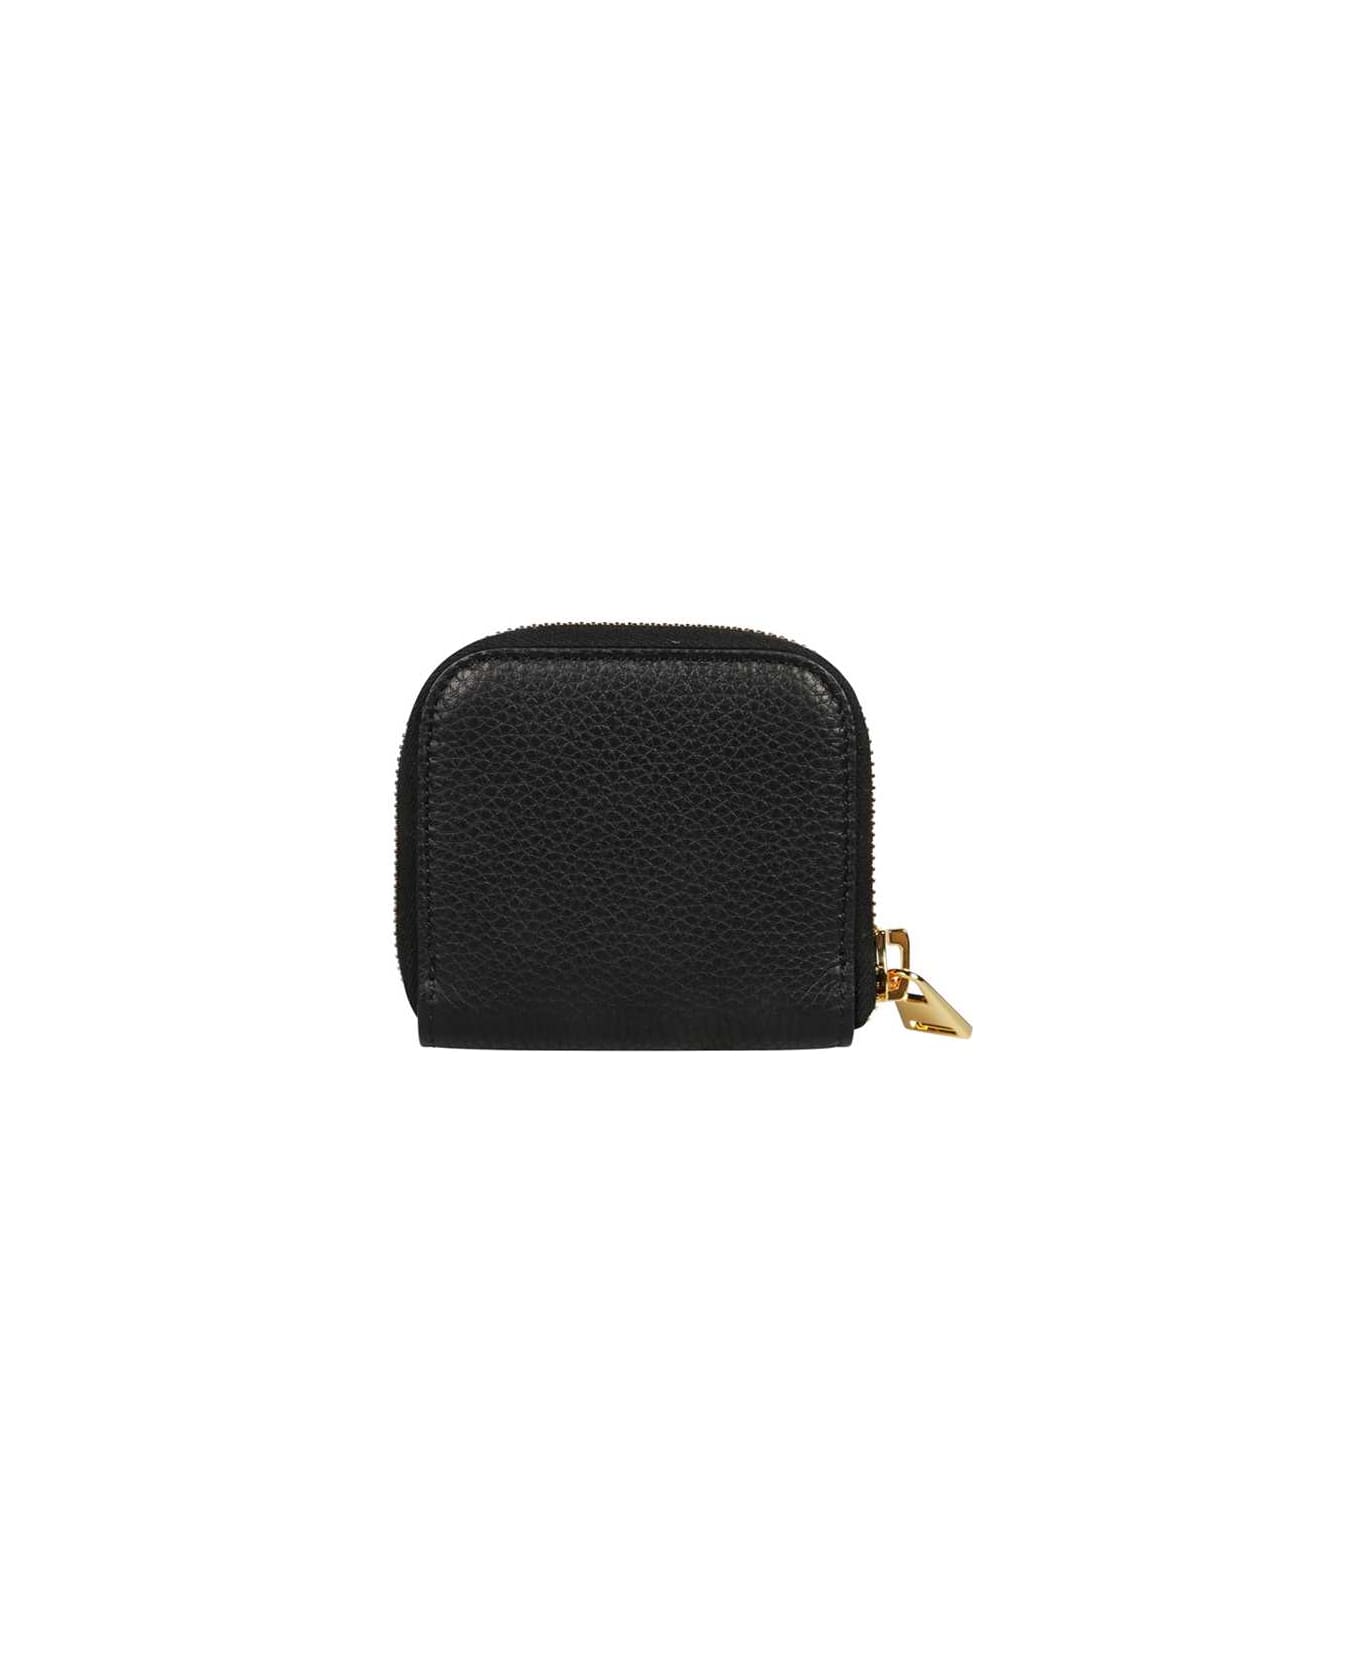 Tom Ford Leather Coin Purse - black 財布